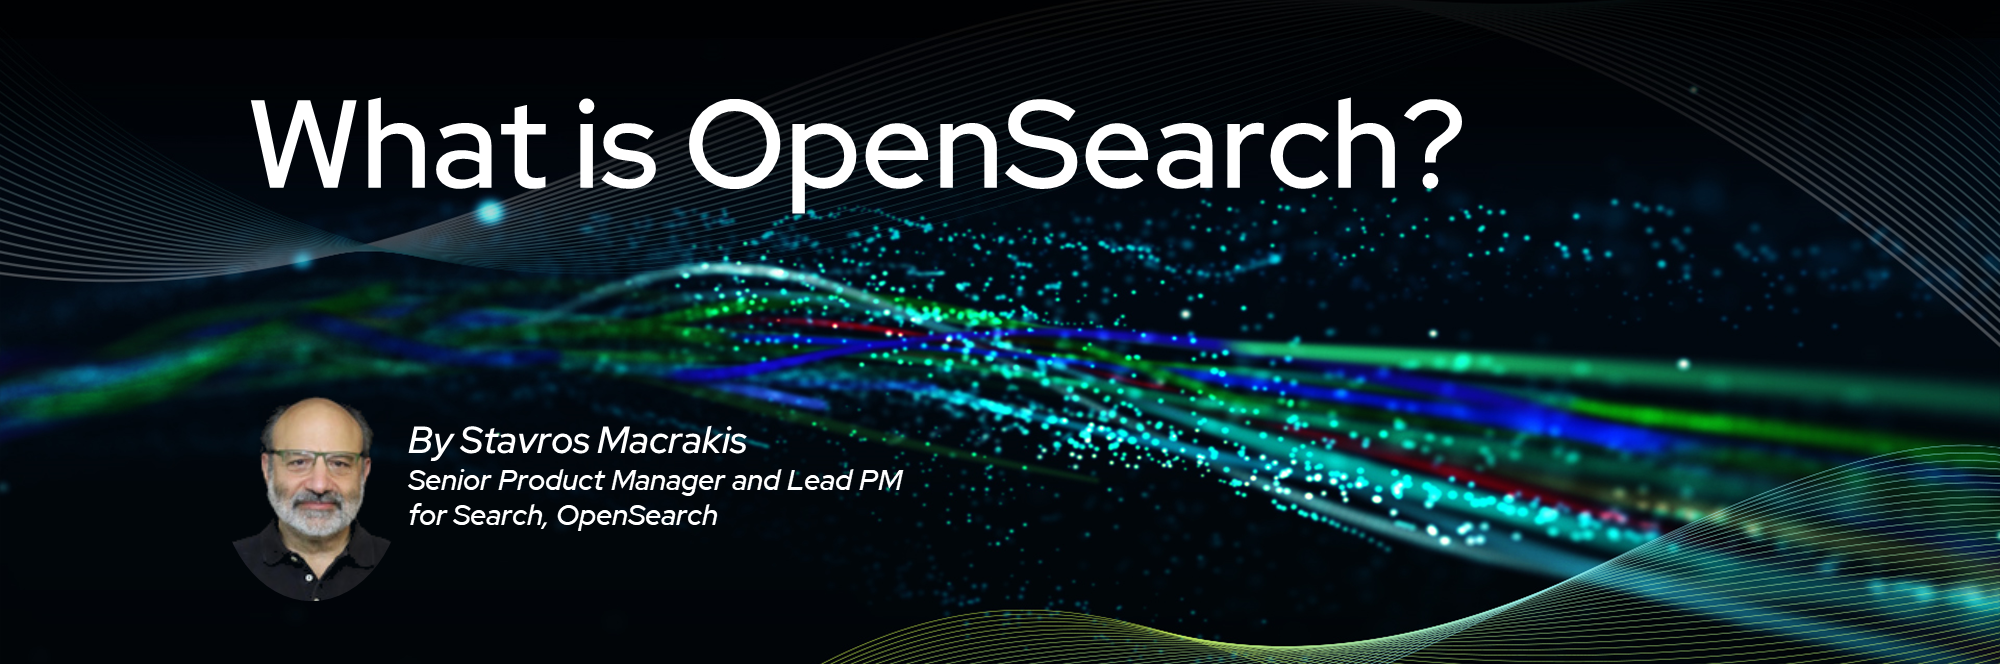 What is OpenSearch? A Pureinsigths Guest Blog by Stavros Macrakis, Senior Product Manager and Lead PM for Search, OpenSearch